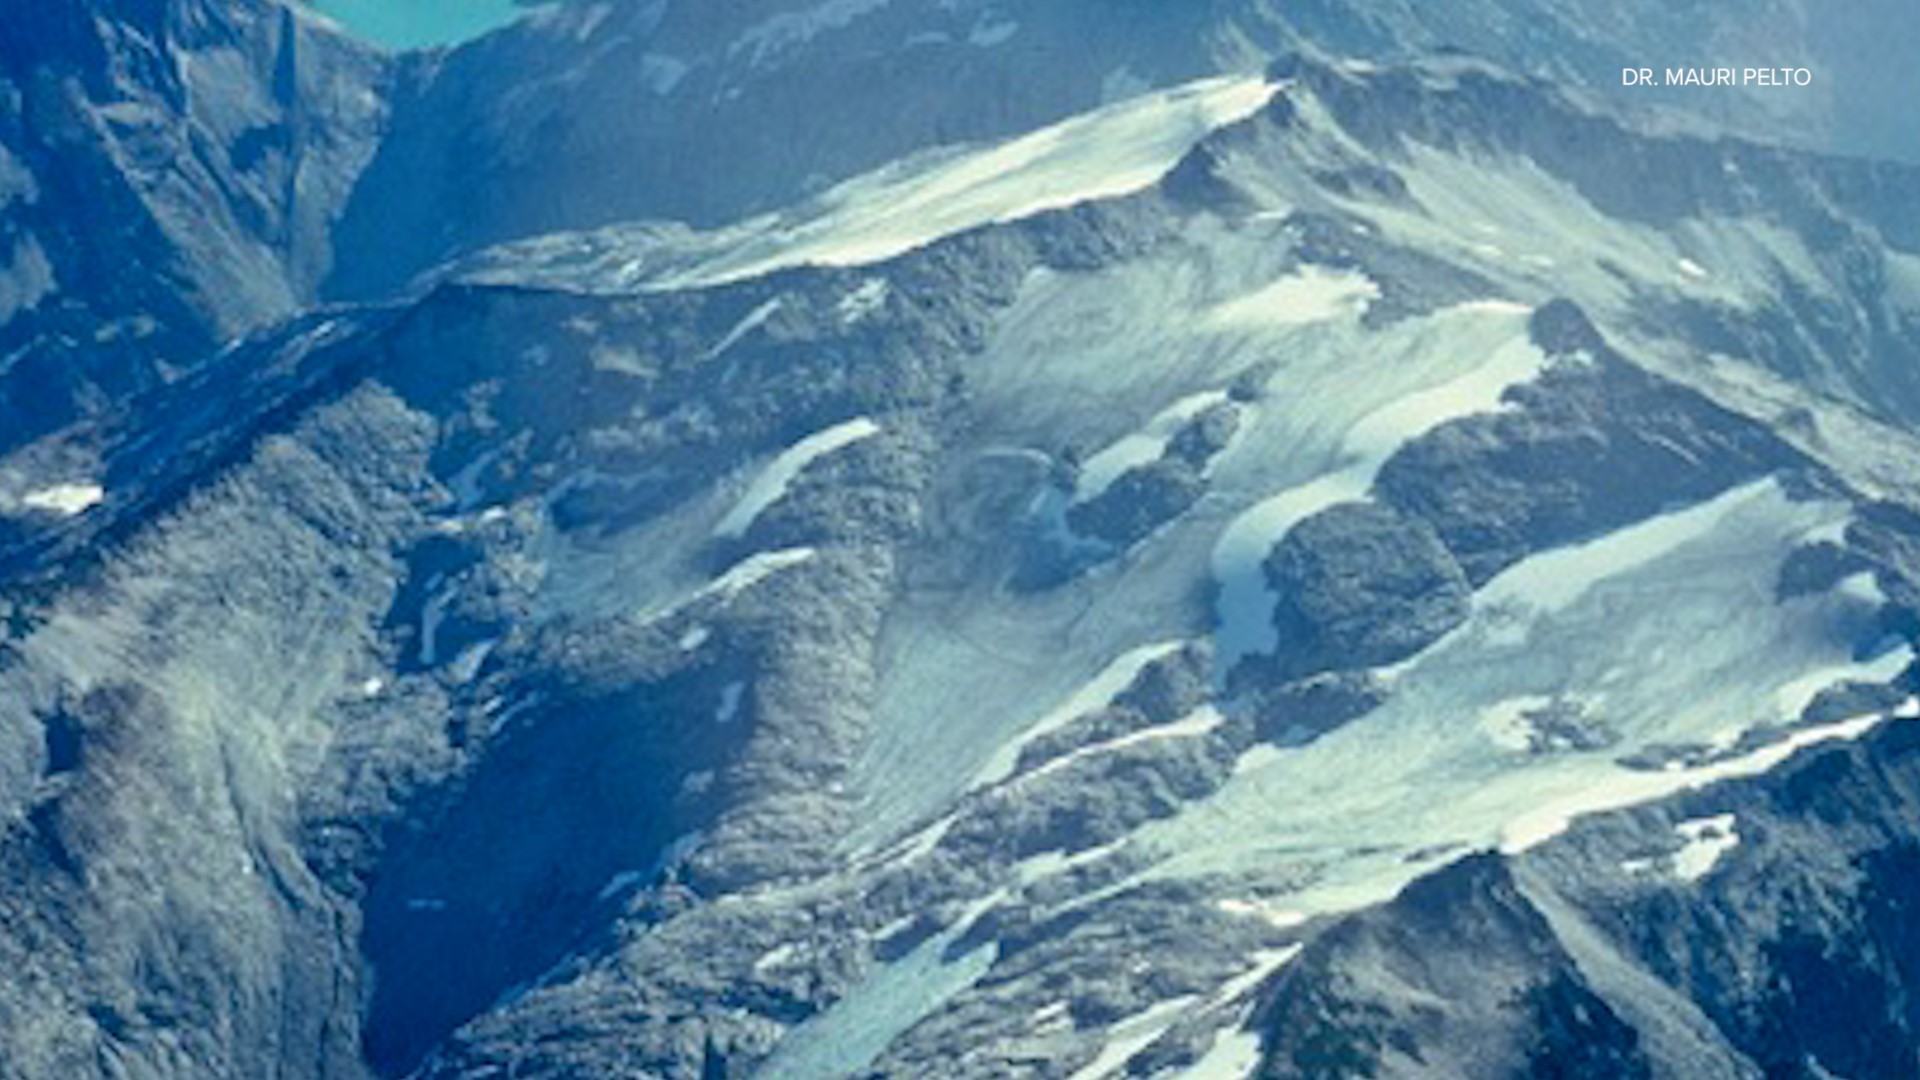 The Hinman Glacier, the largest glacier between Mount Rainier and Glacier Peak, has officially melted away. Glaciologist Dr. Mauri Pelto discusses the impact.